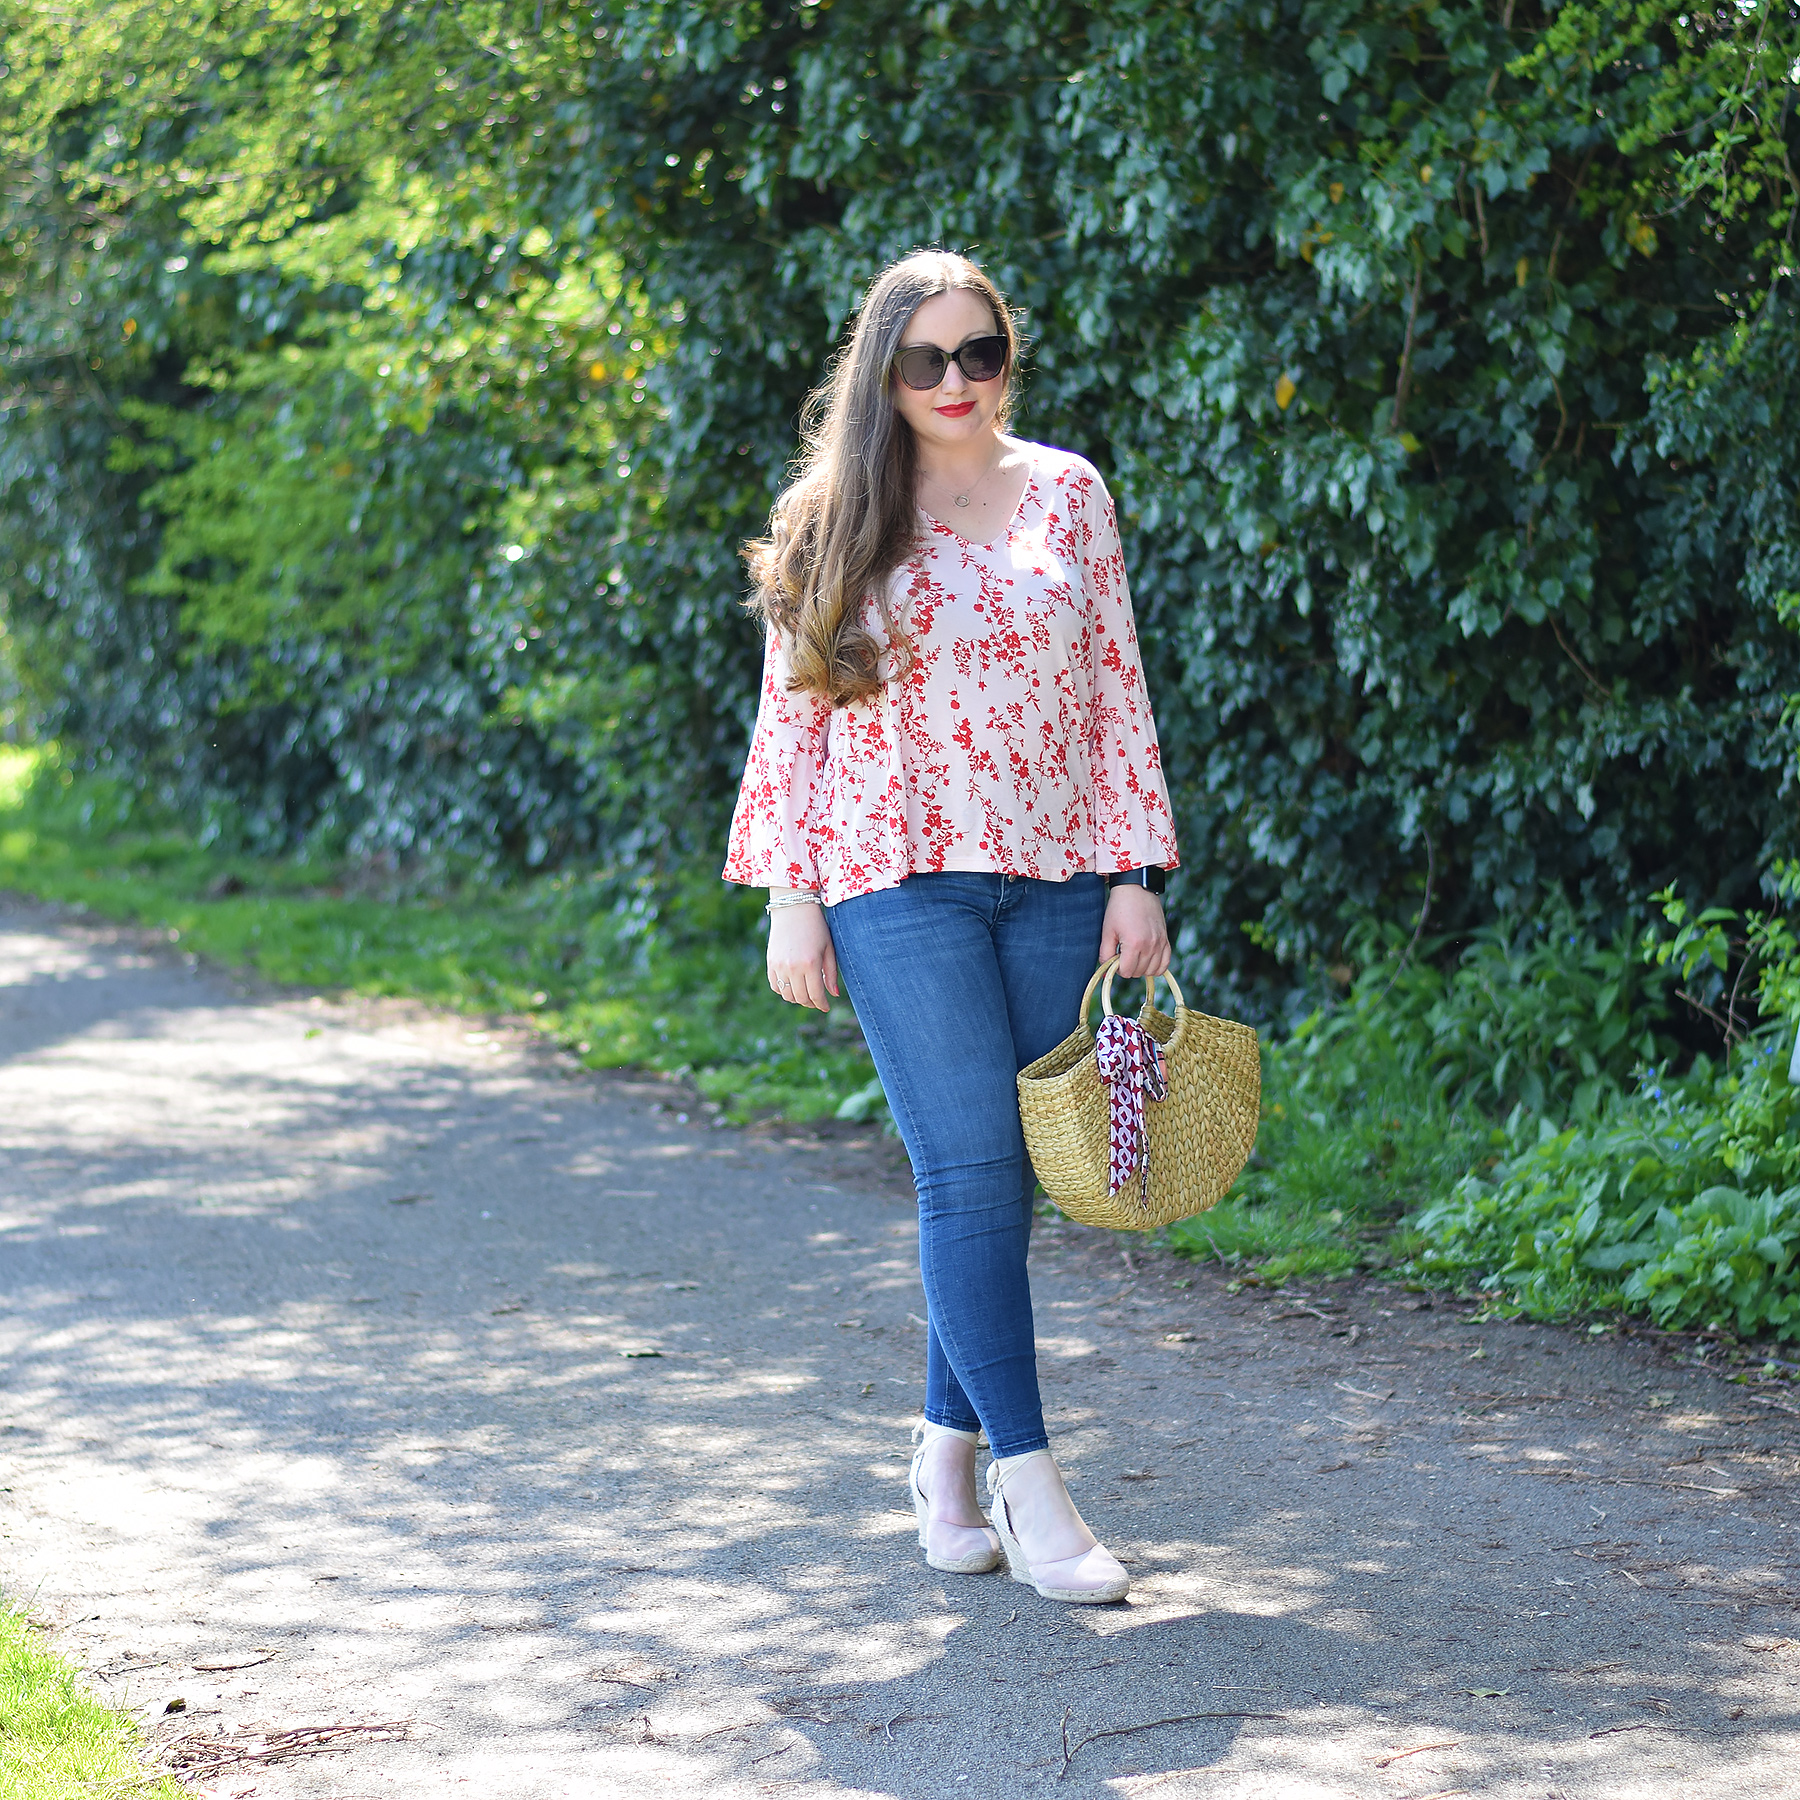 H&M Pink and red floral top outfit